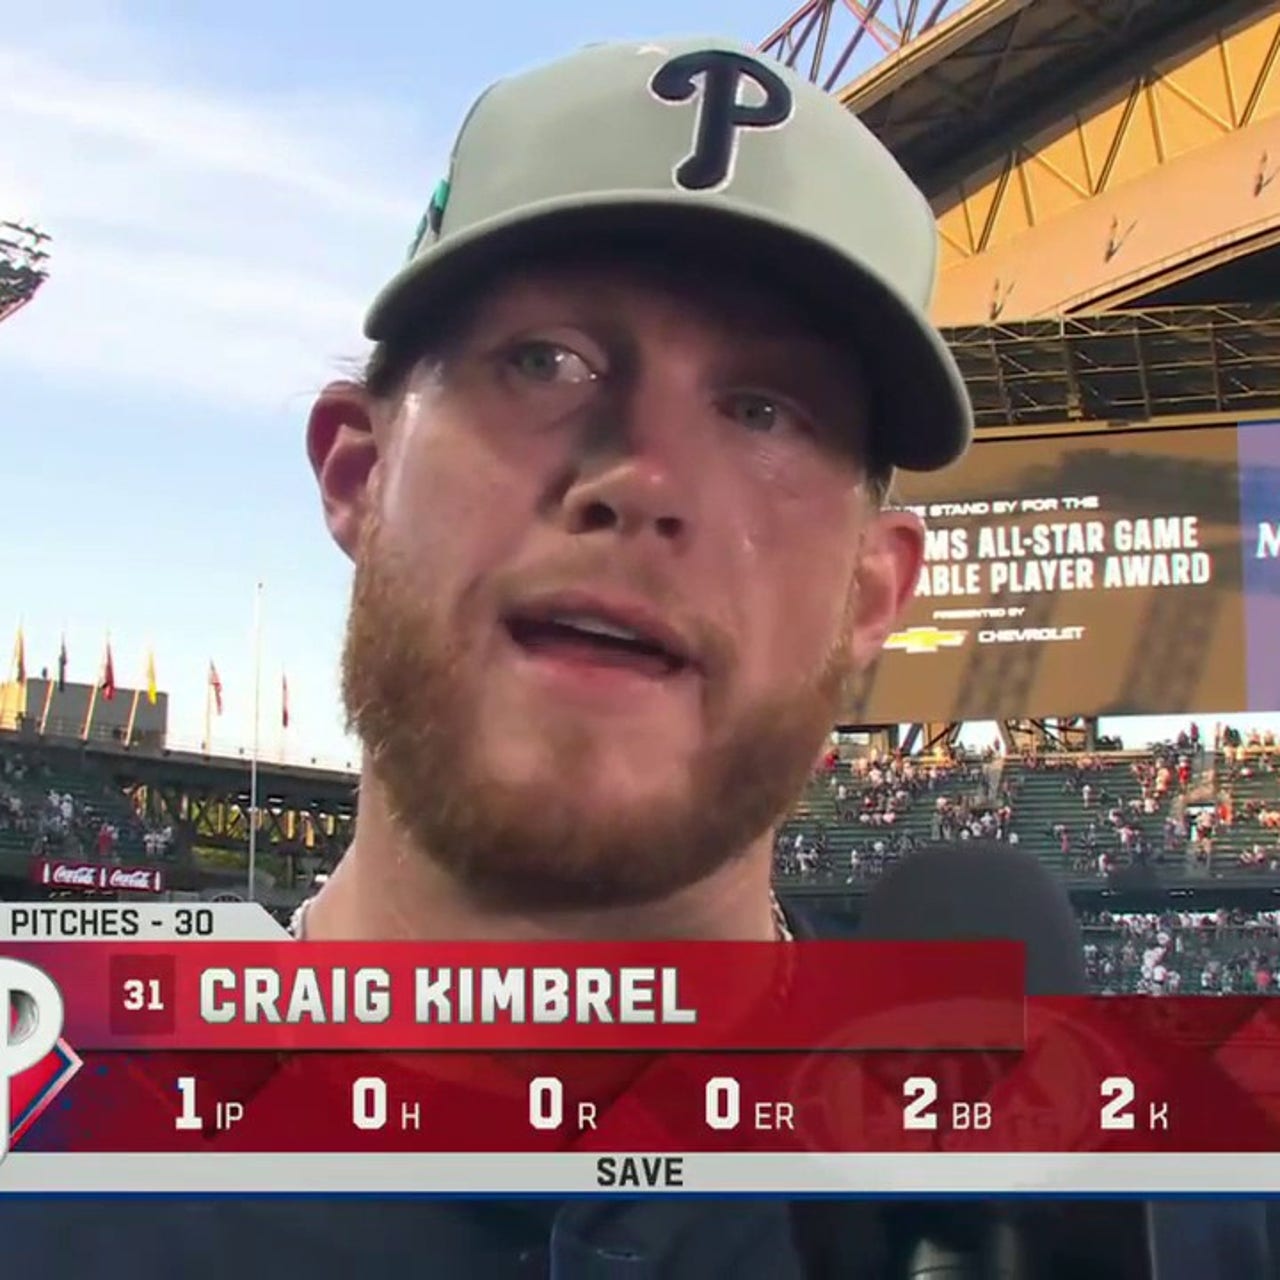 This year has been something else' - Phillies' Craig Kimbrel reflects